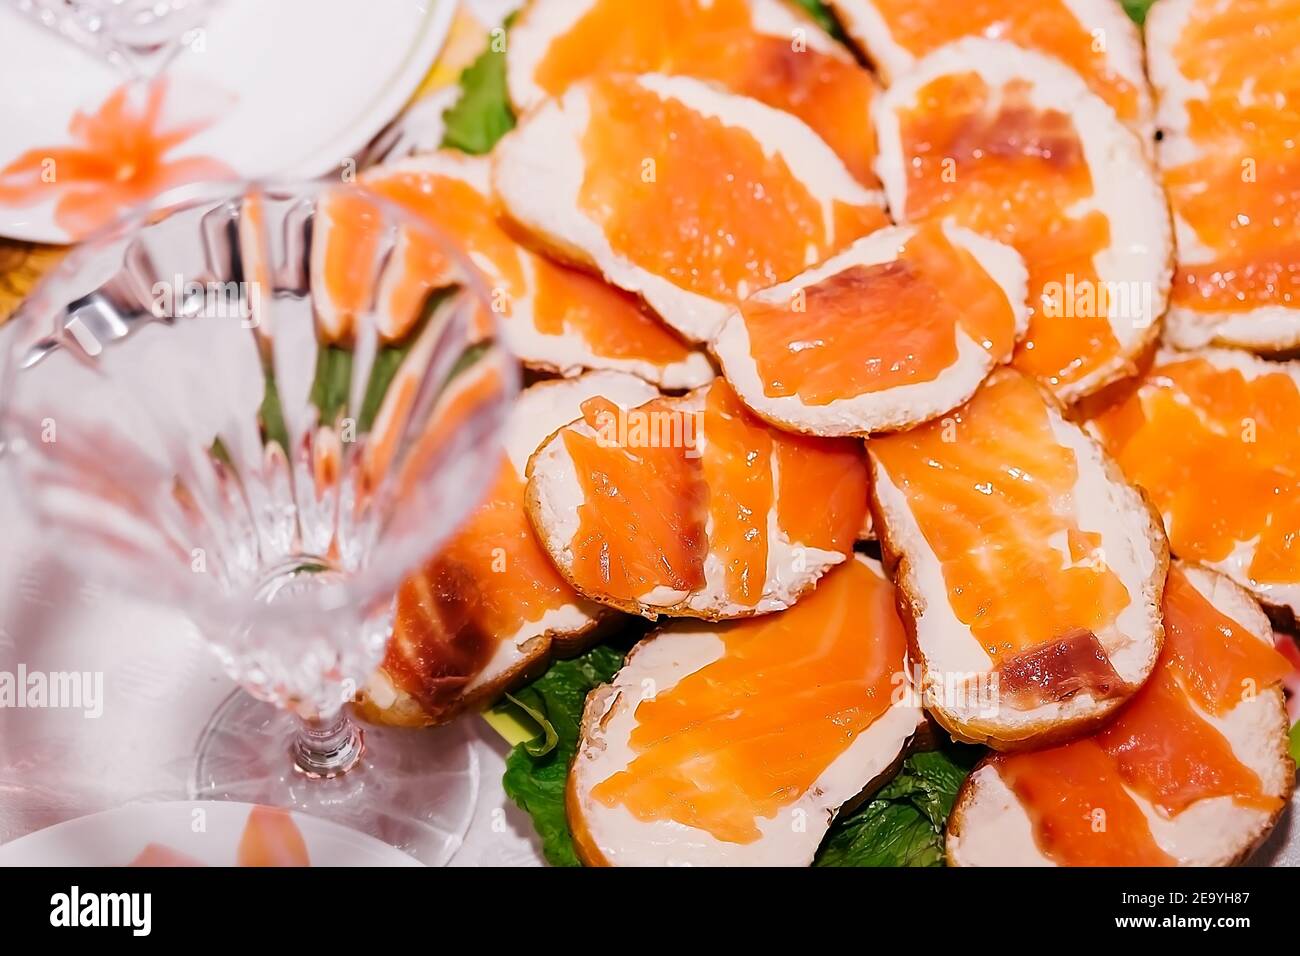 many sandwiches with butter and red fish lie on a plate near a crystal champagne glass Stock Photo